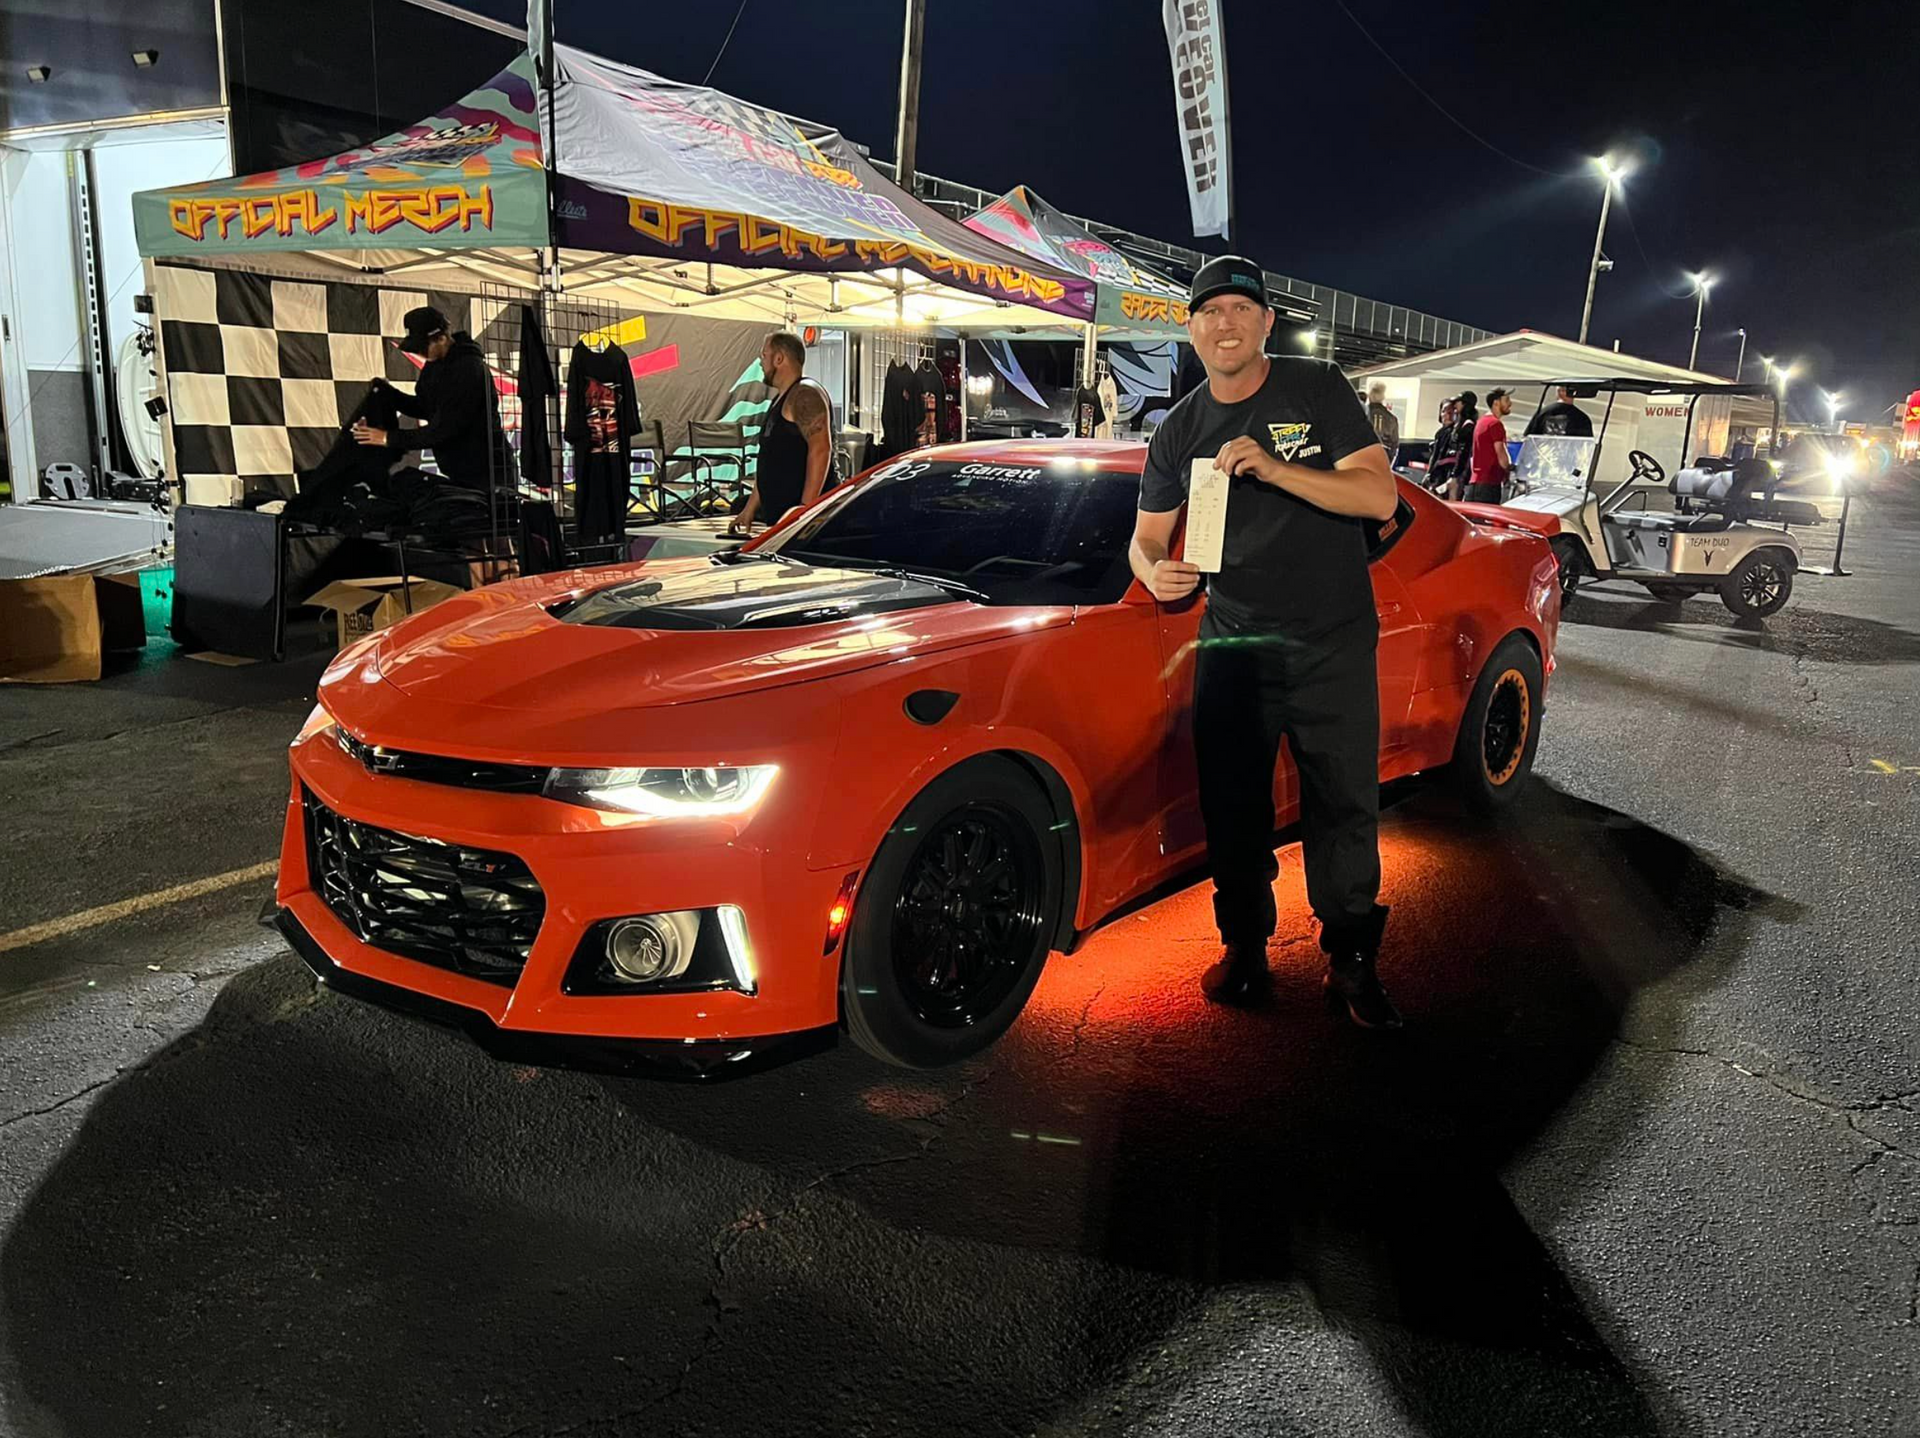 GForce 9″ IRS helps propel Justin Keith and his 6th Gen Camaro to a world record!